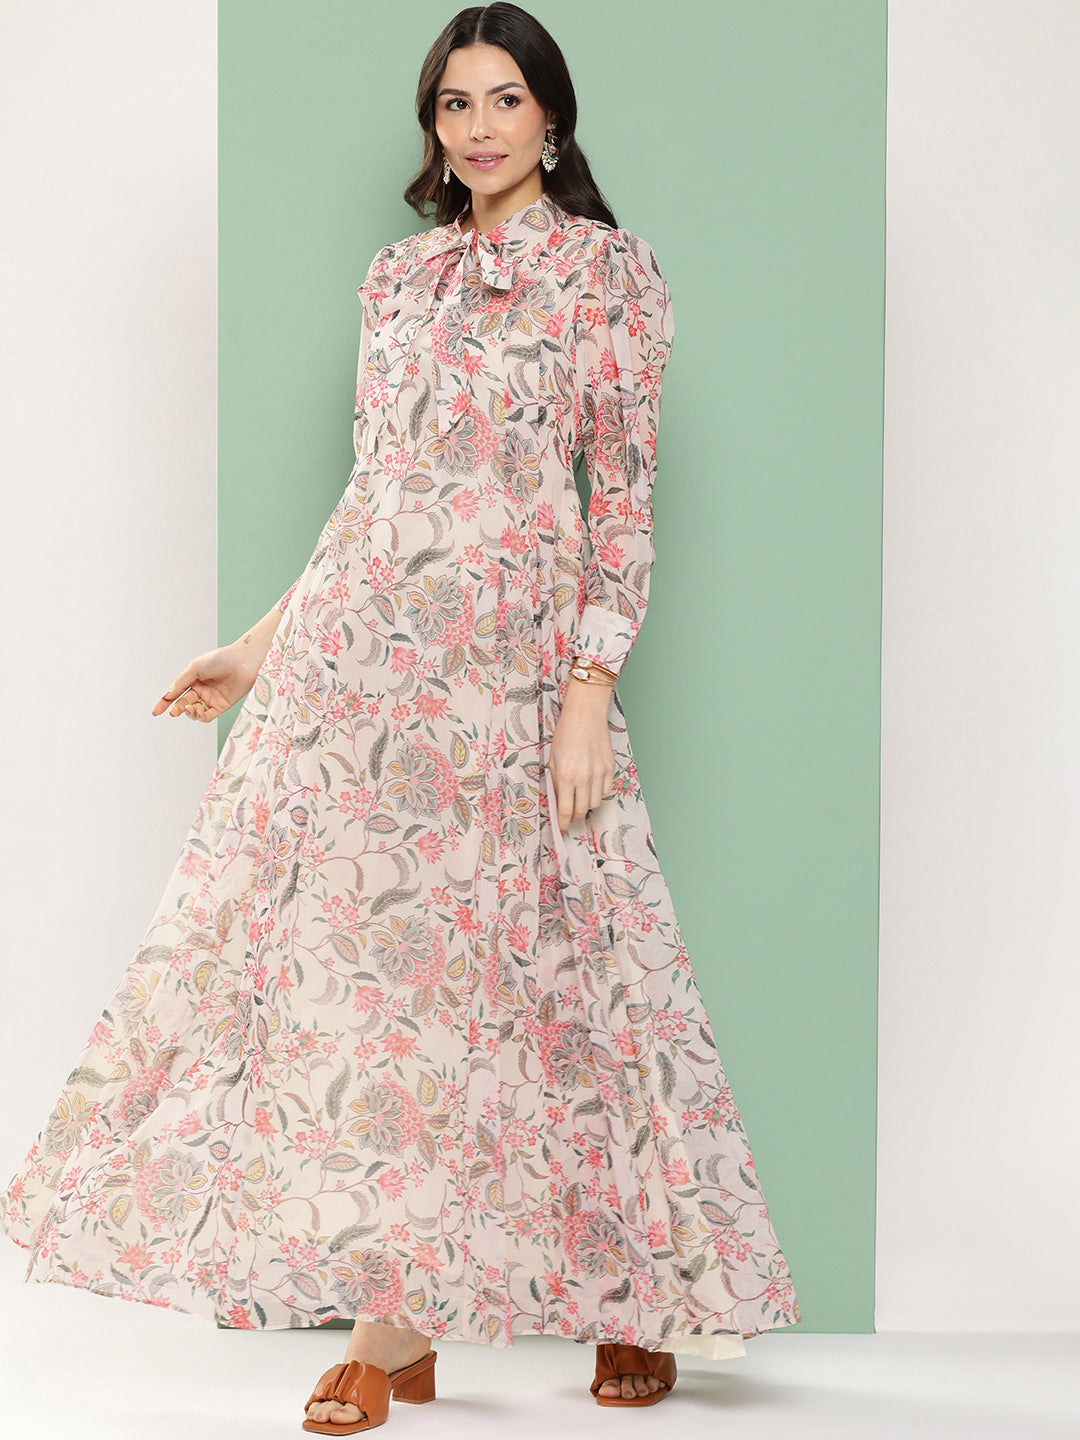 Bhama Couture Off-White Printed Long Dress With Tie-Up Neck